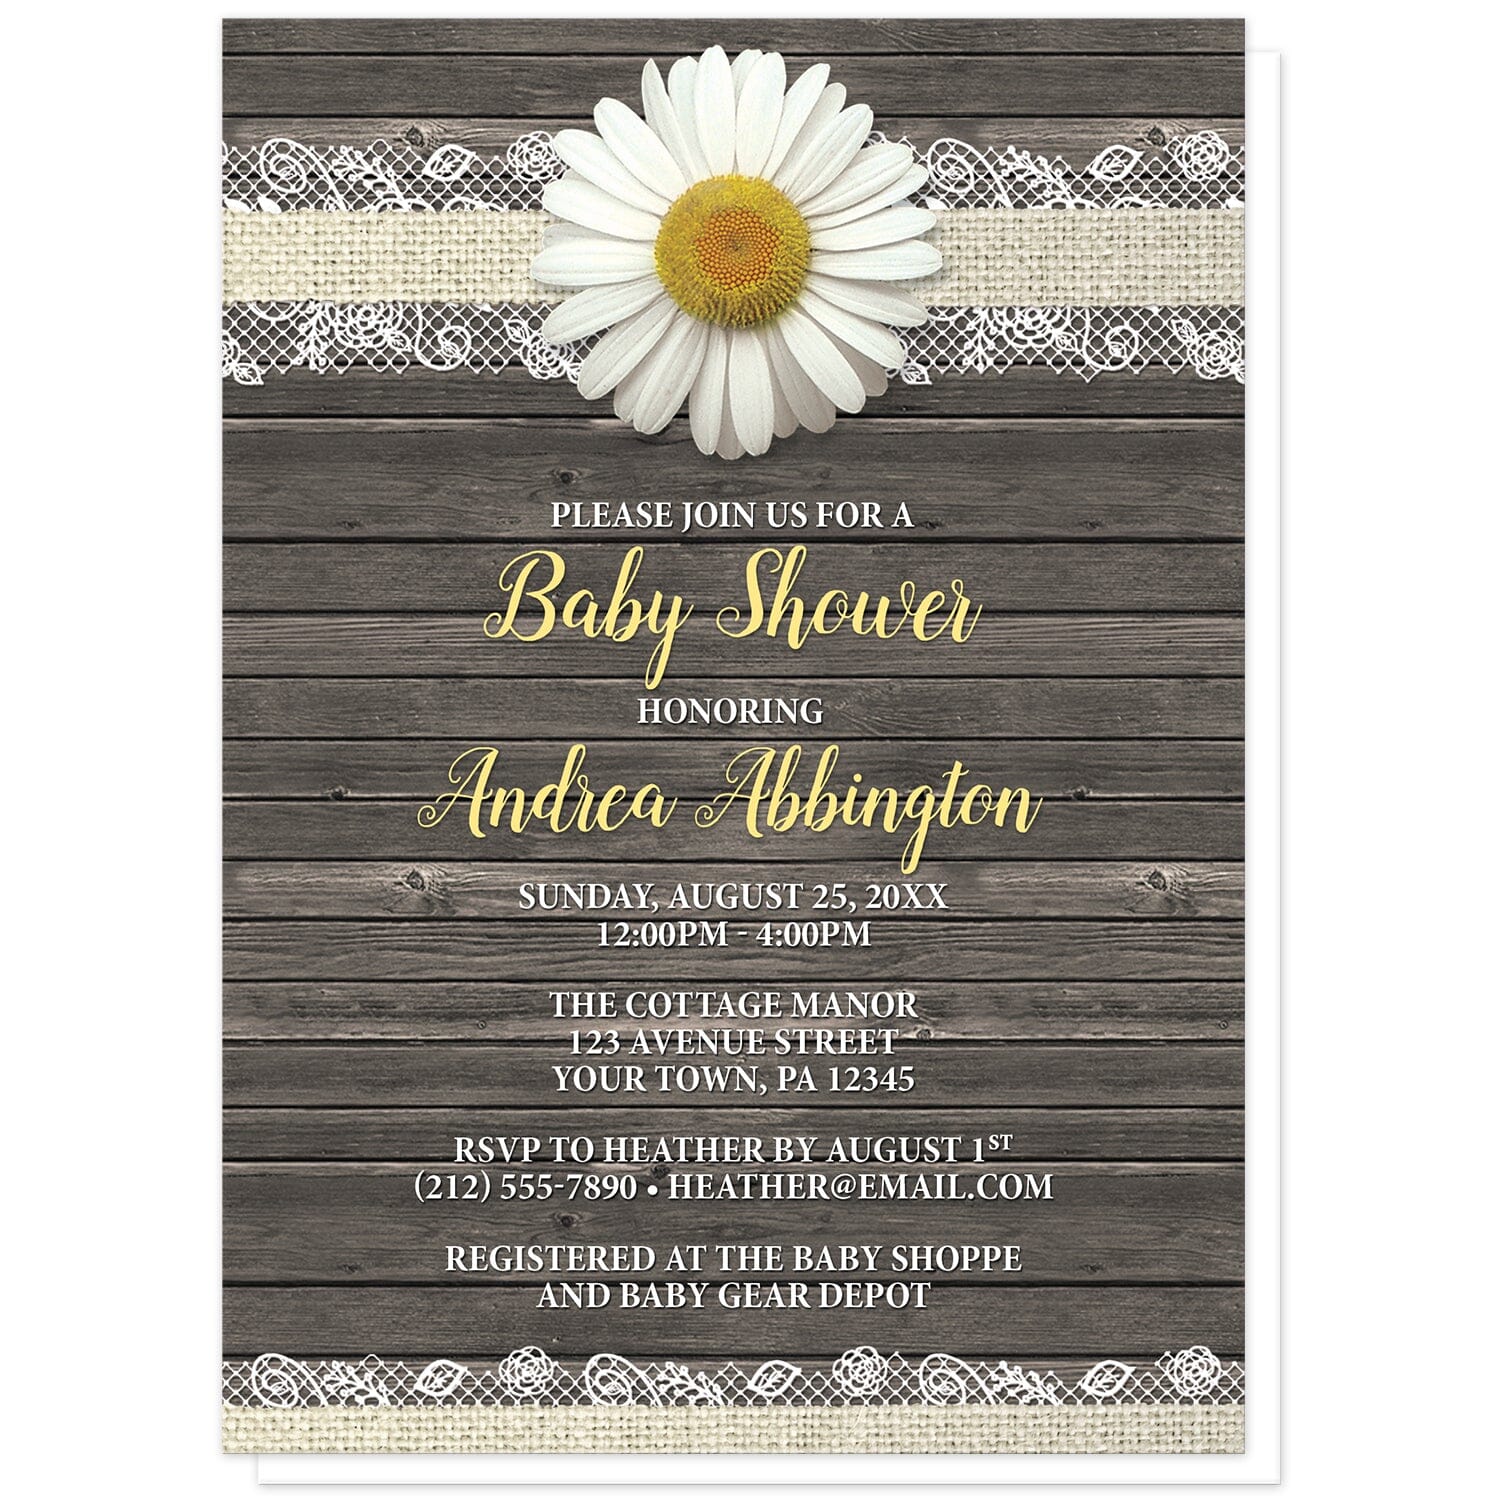 Daisy Burlap and Lace Wood Baby Shower Invitations at Artistically Invited. Southern rustic daisy burlap and lace wood baby shower invitations with a white daisy flower centered at the top on a burlap and lace ribbon strip illustration, over a brown country wood background. Your personalized baby shower celebration details are custom printed in yellow and white over the wood design. 